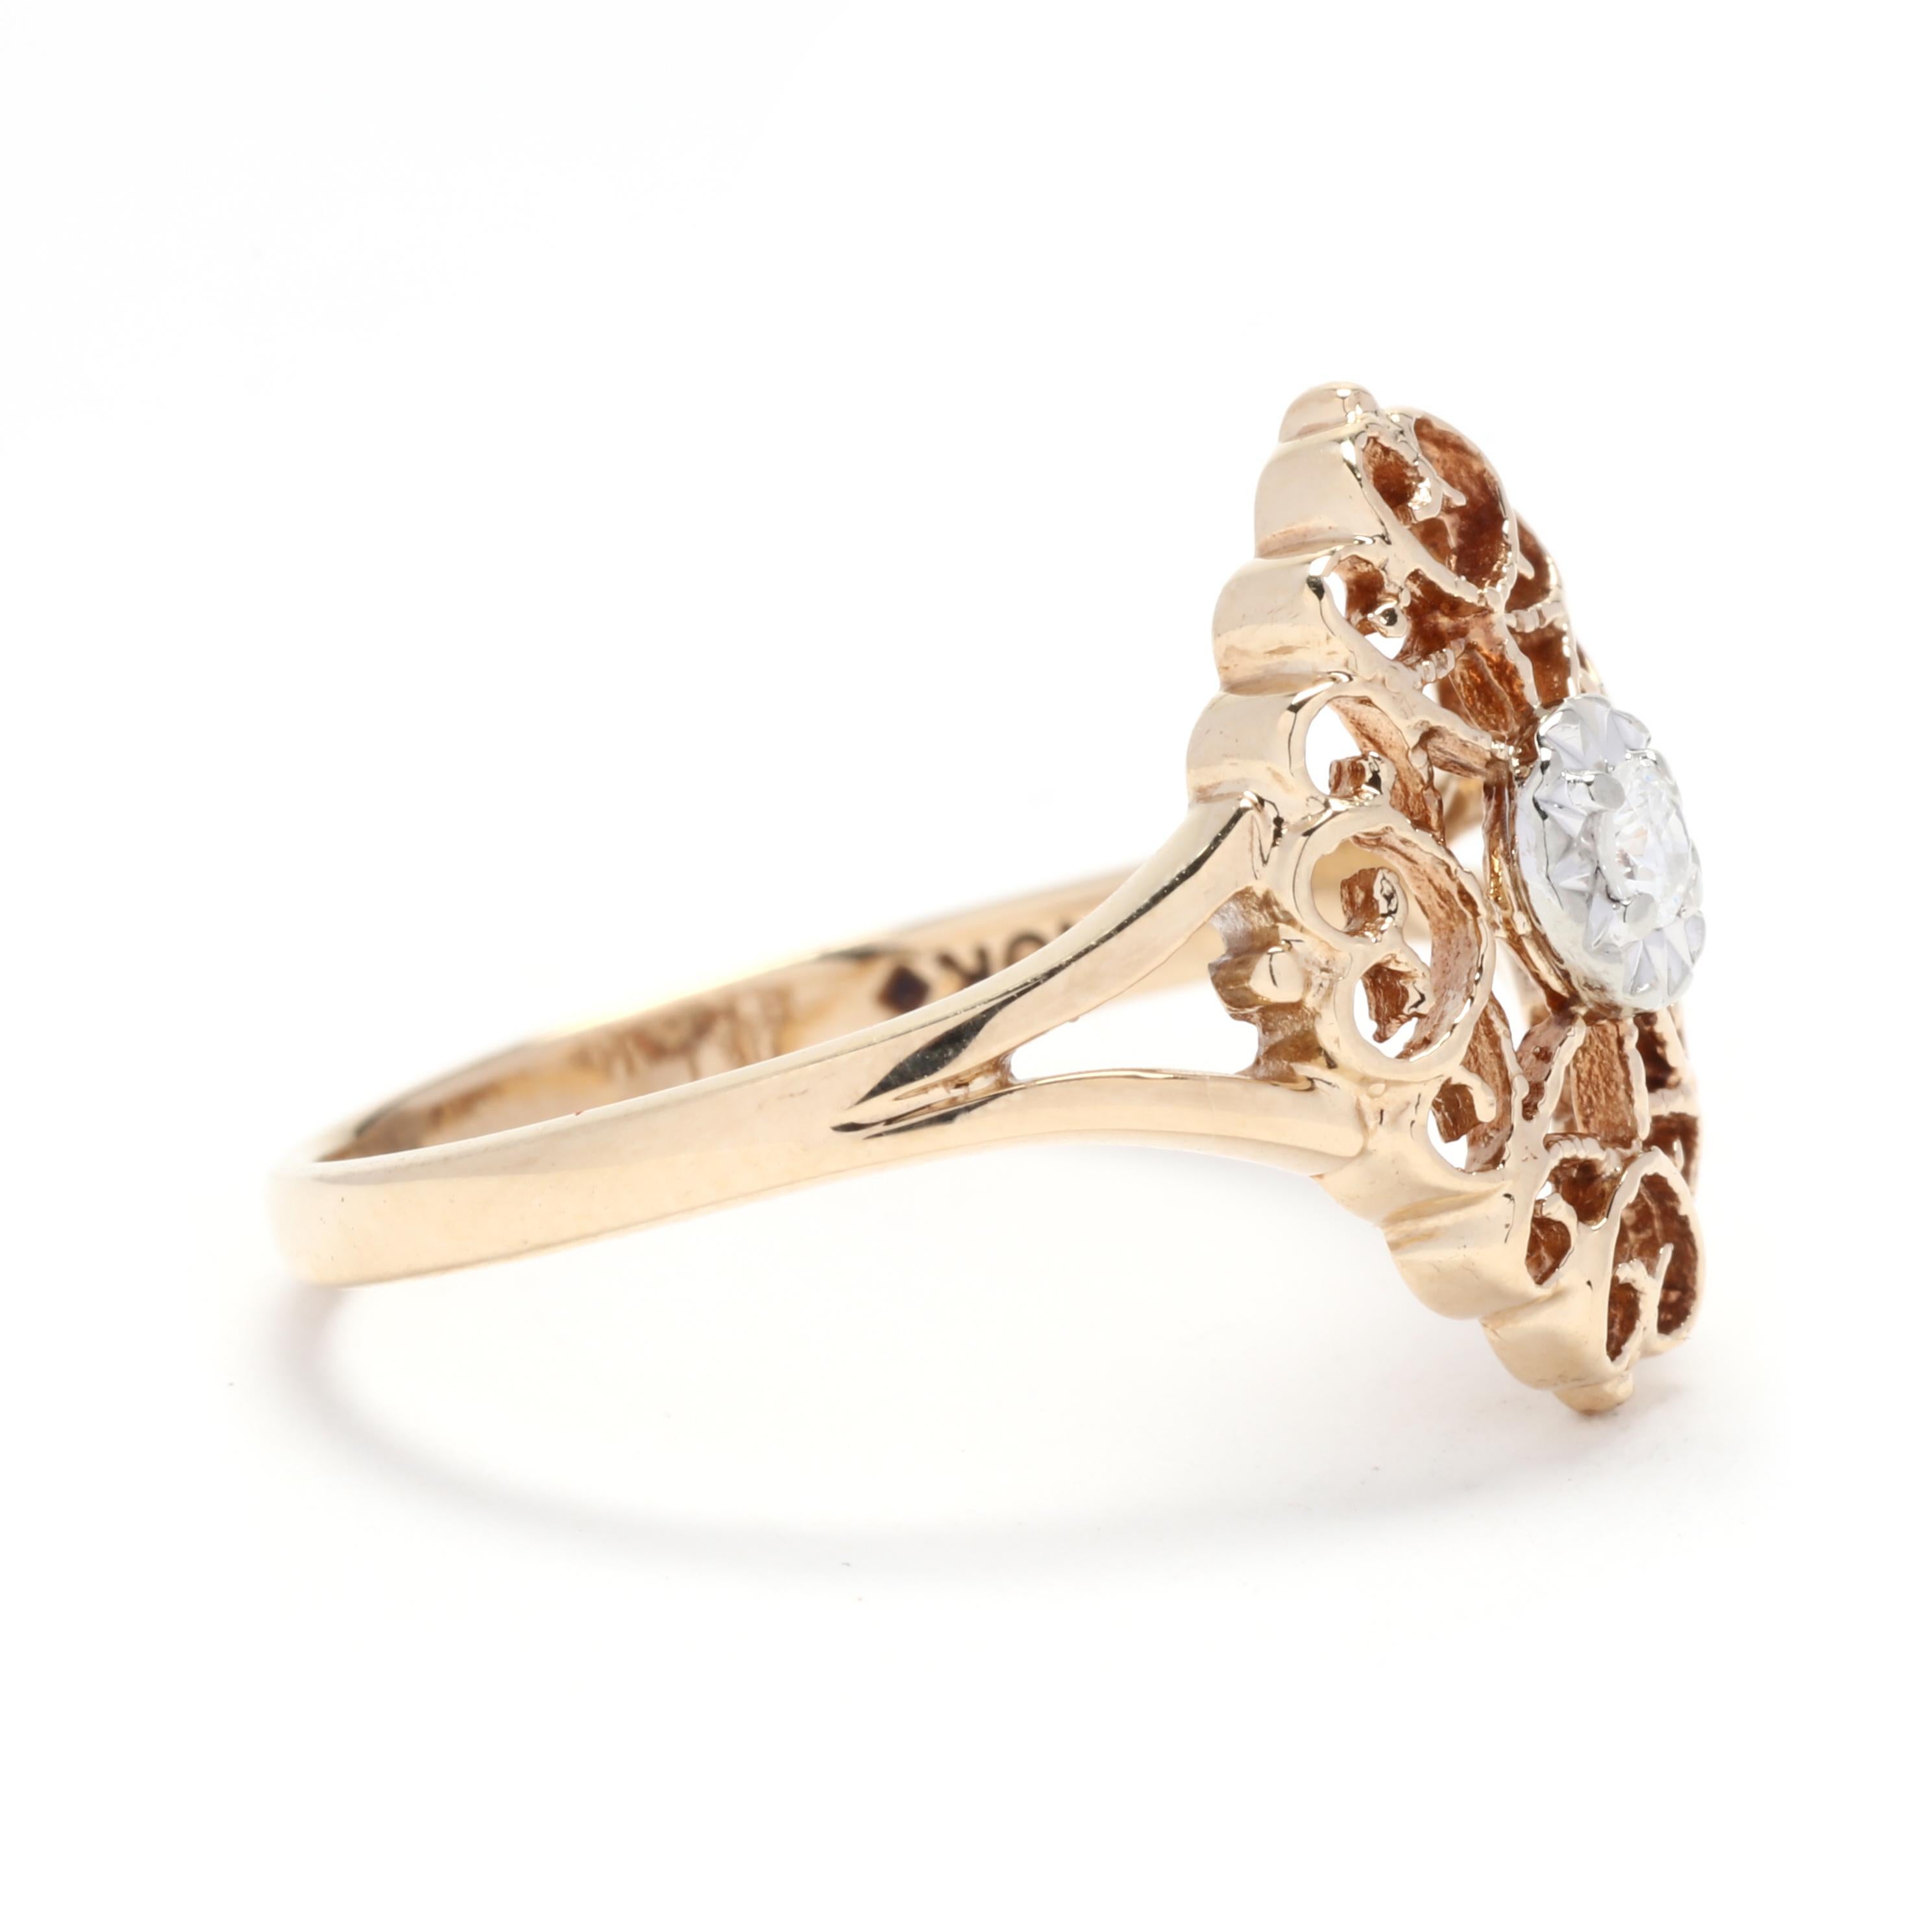 This vintage diamond filigree ring is an exquisite piece of jewelry that exudes timeless beauty. Crafted in 10K yellow gold, this ring features intricate filigree detailing that adds a touch of elegance and refinement. The centerpiece of this ring